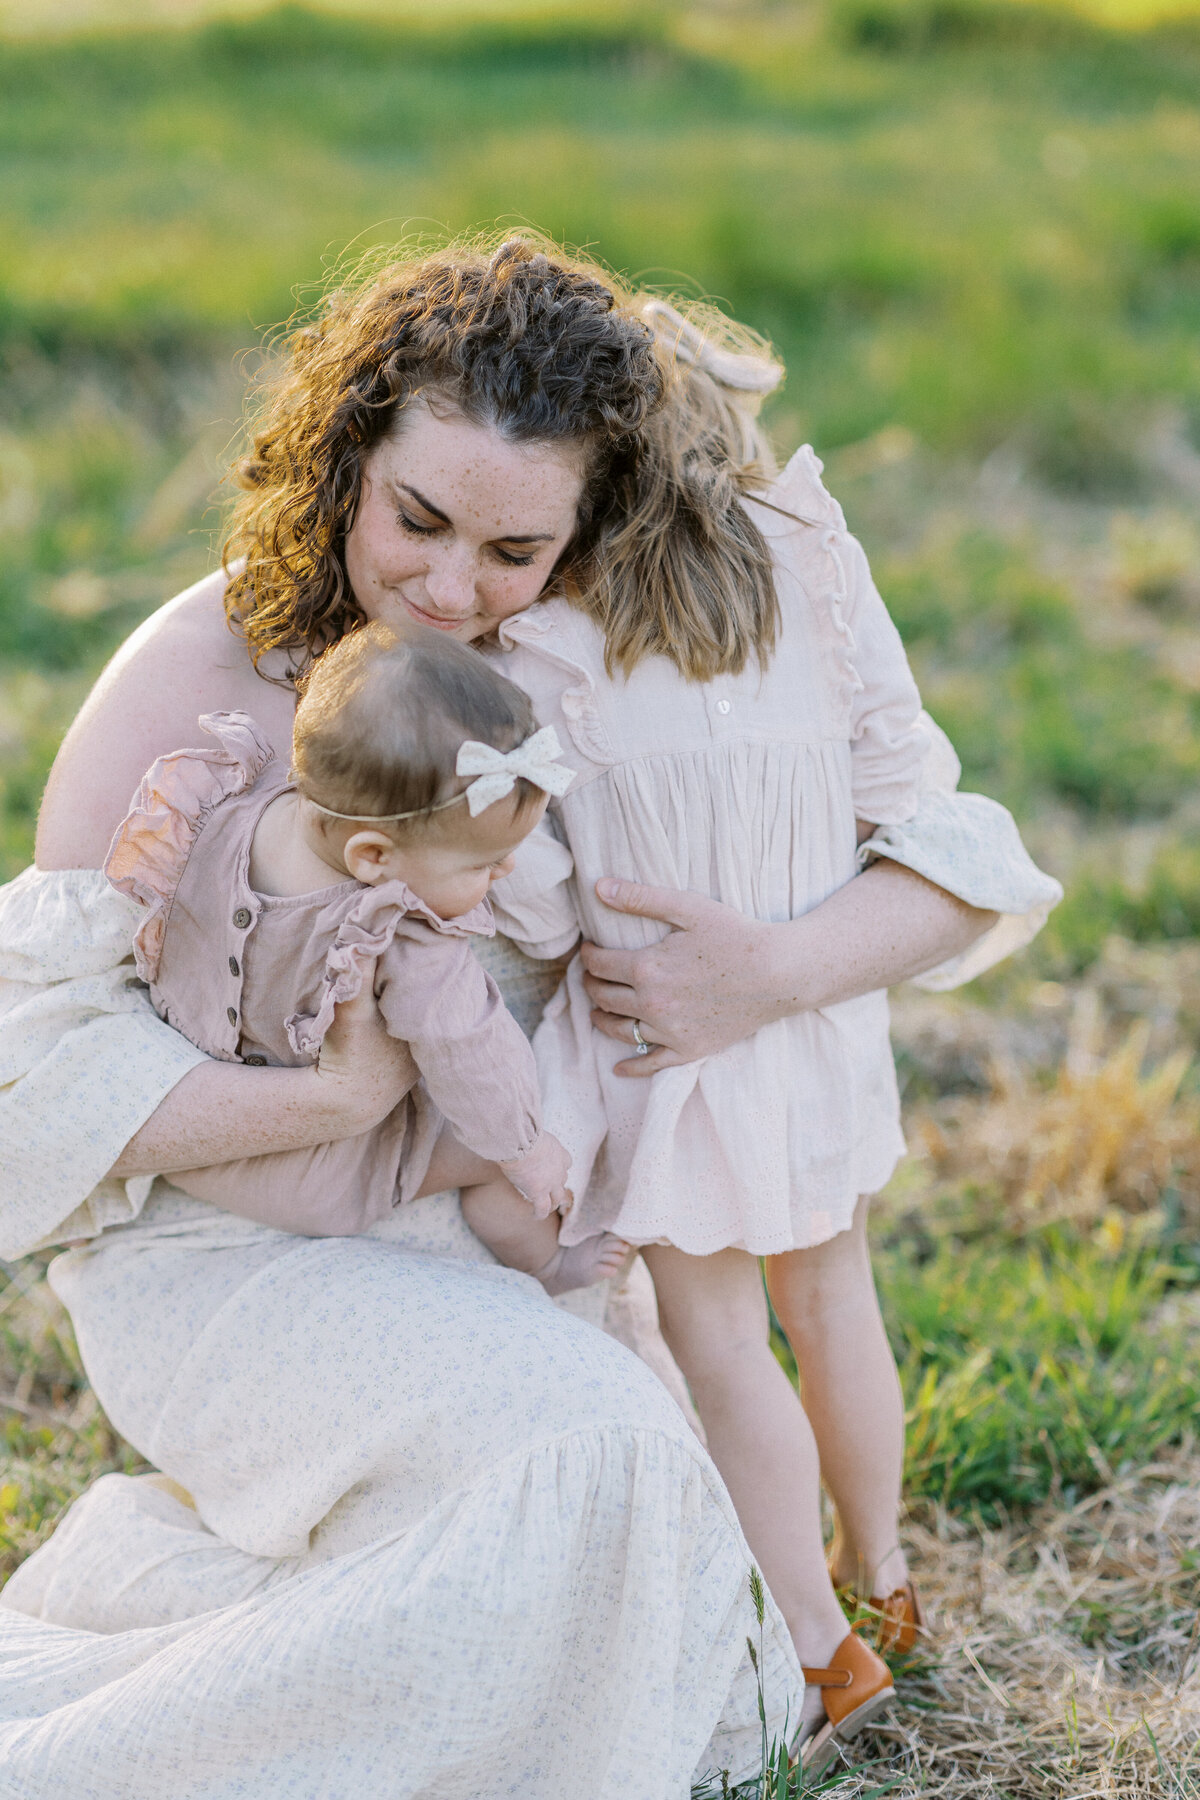 Lauran Gosney is a destination wedding and family photographer